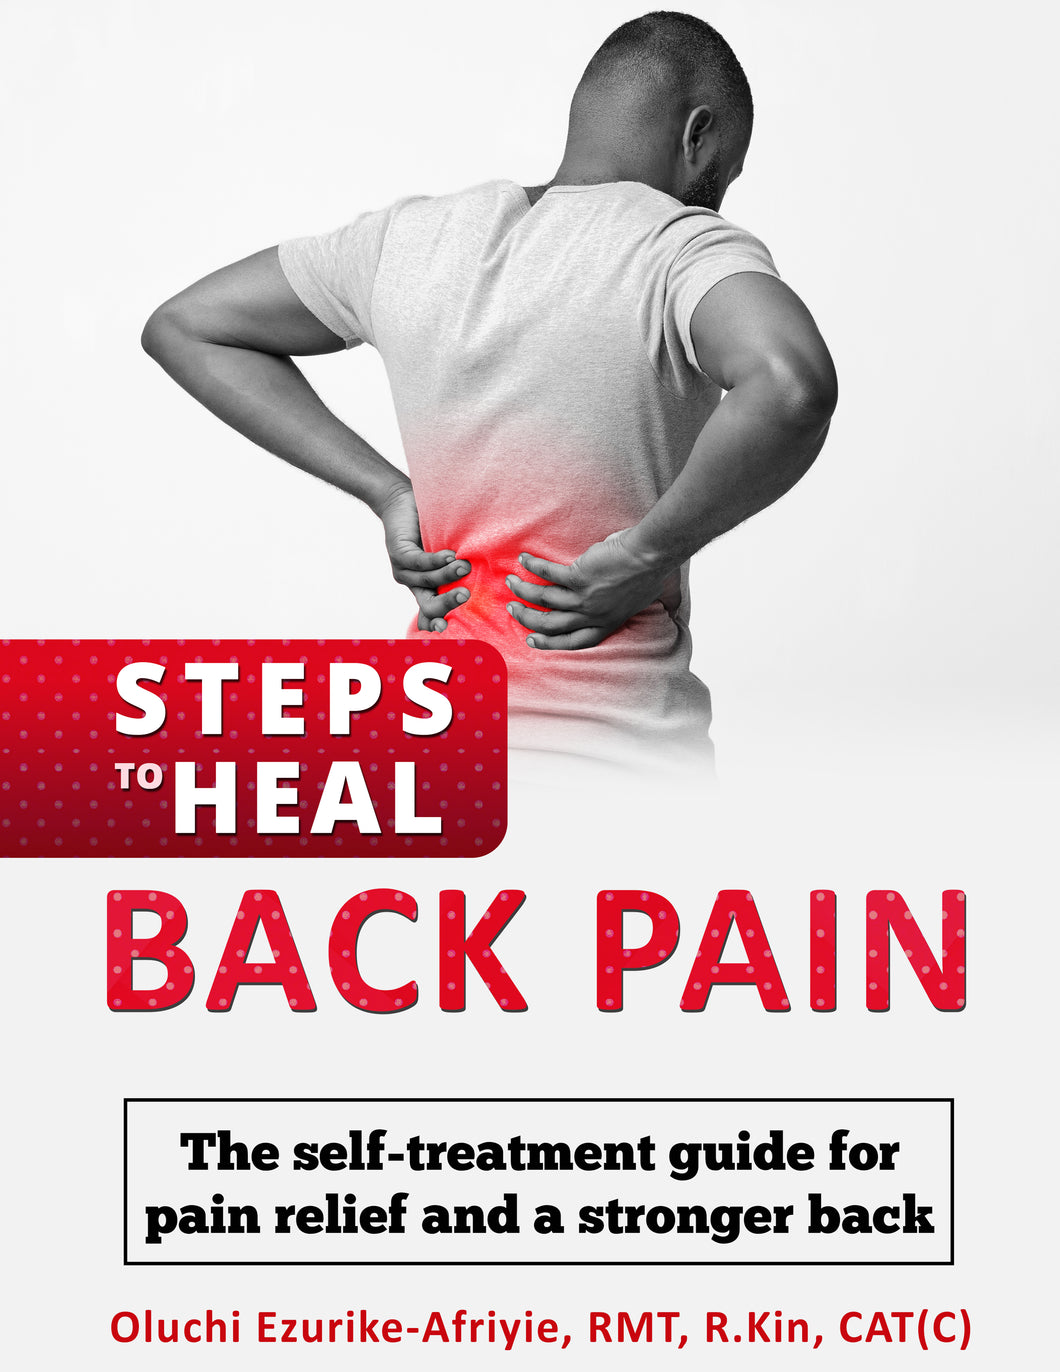 3 Steps to Heal Back Pain: The self-treatment guide for pain relief and a stronger back